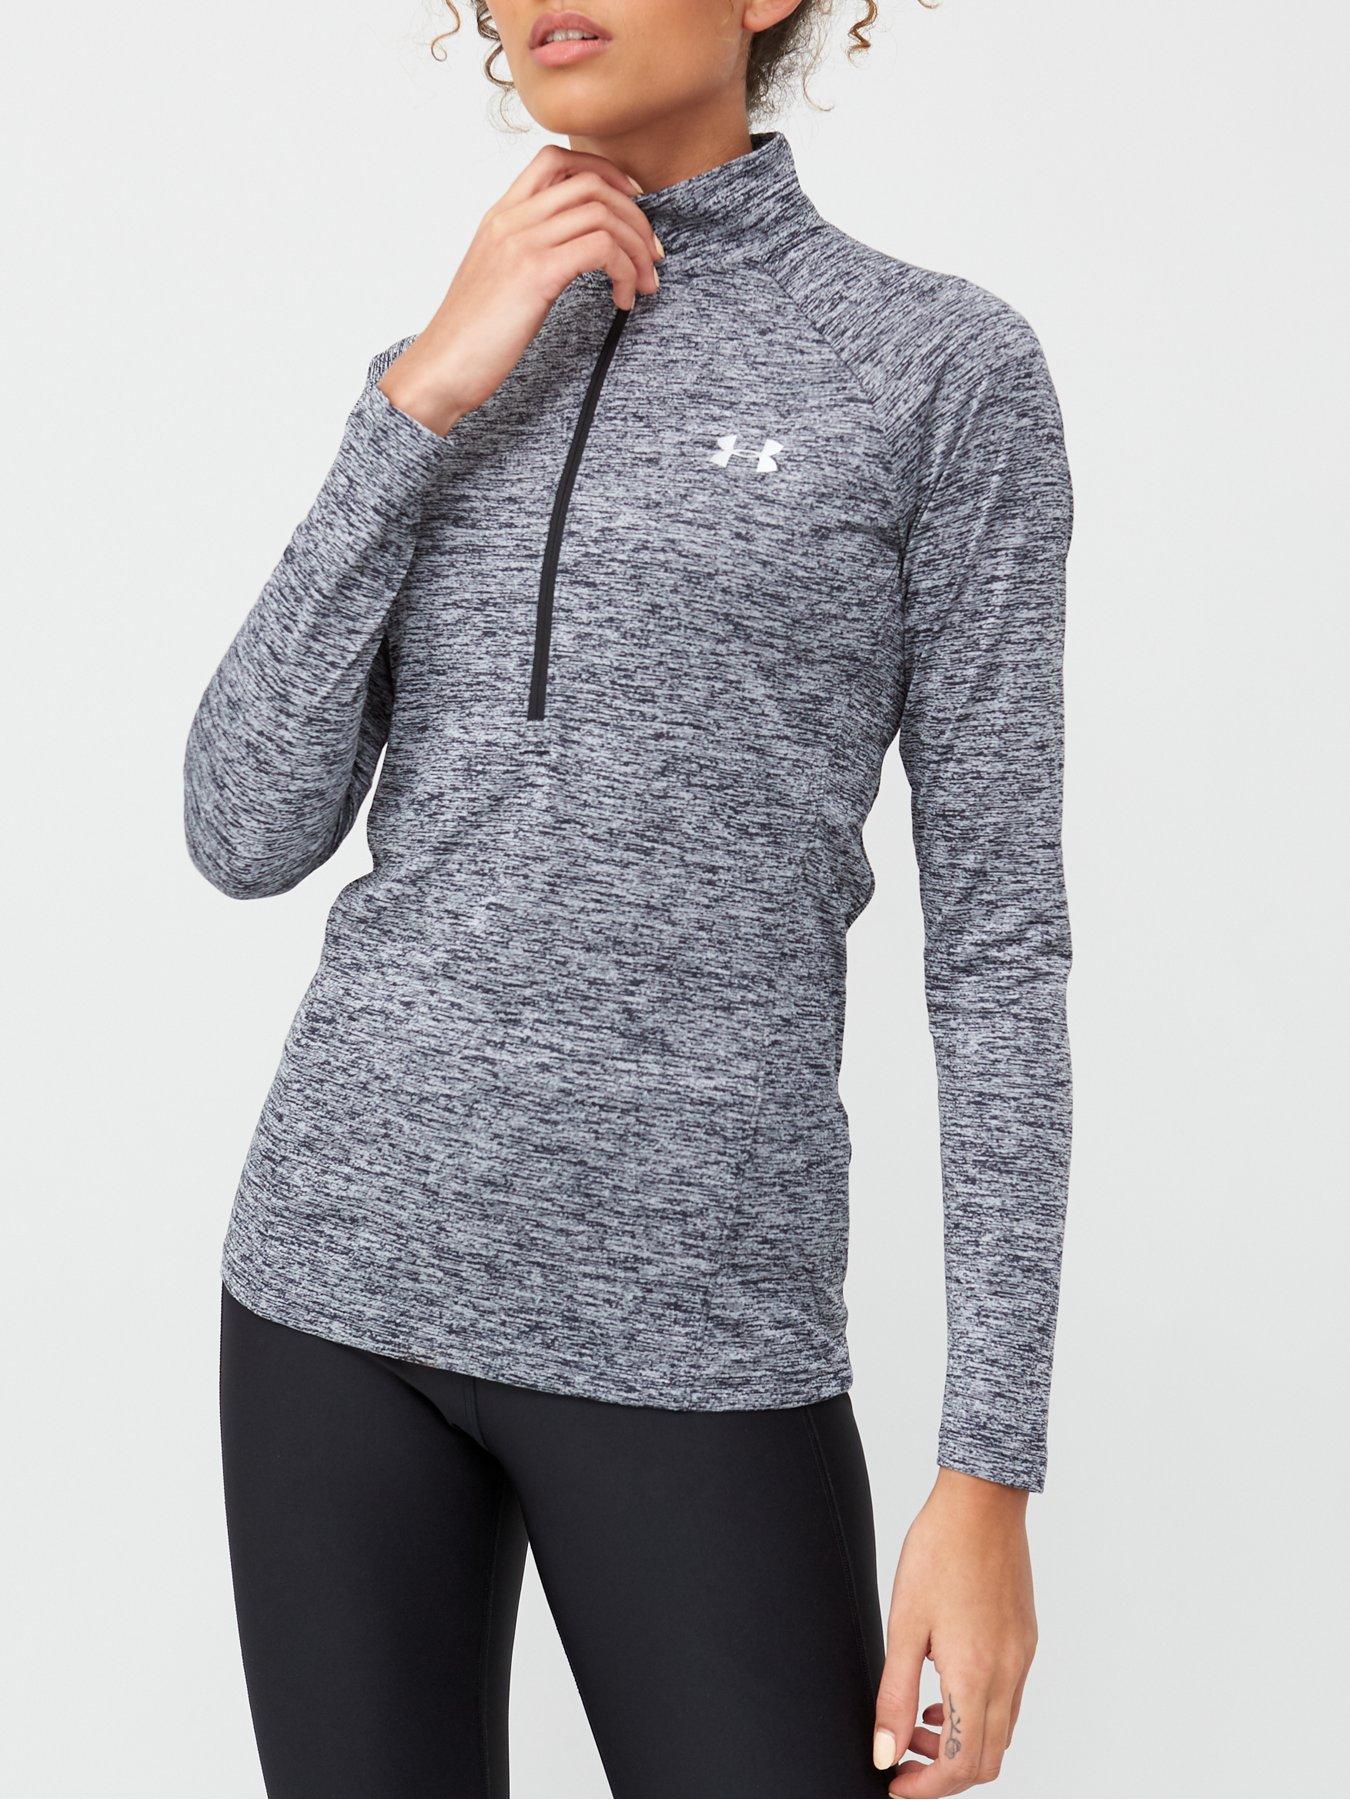 Under armour | Tops & t-shirts | www.very.co.uk